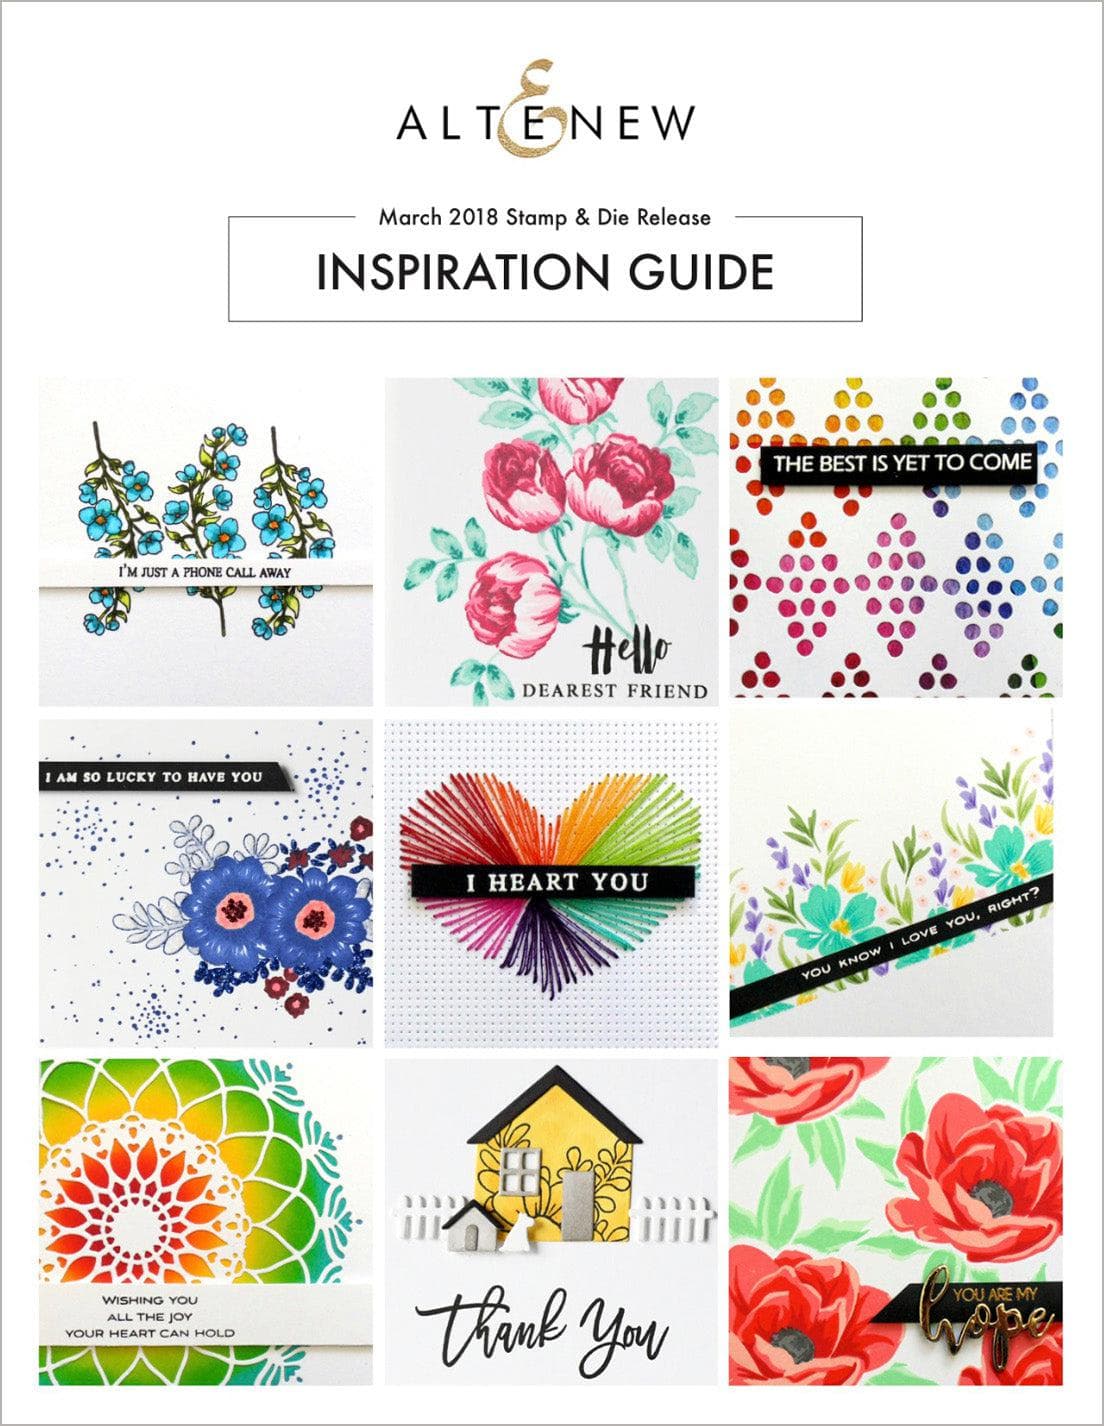 PrintUSA Printed Media Stitched With Hope Release Inspiration Guide